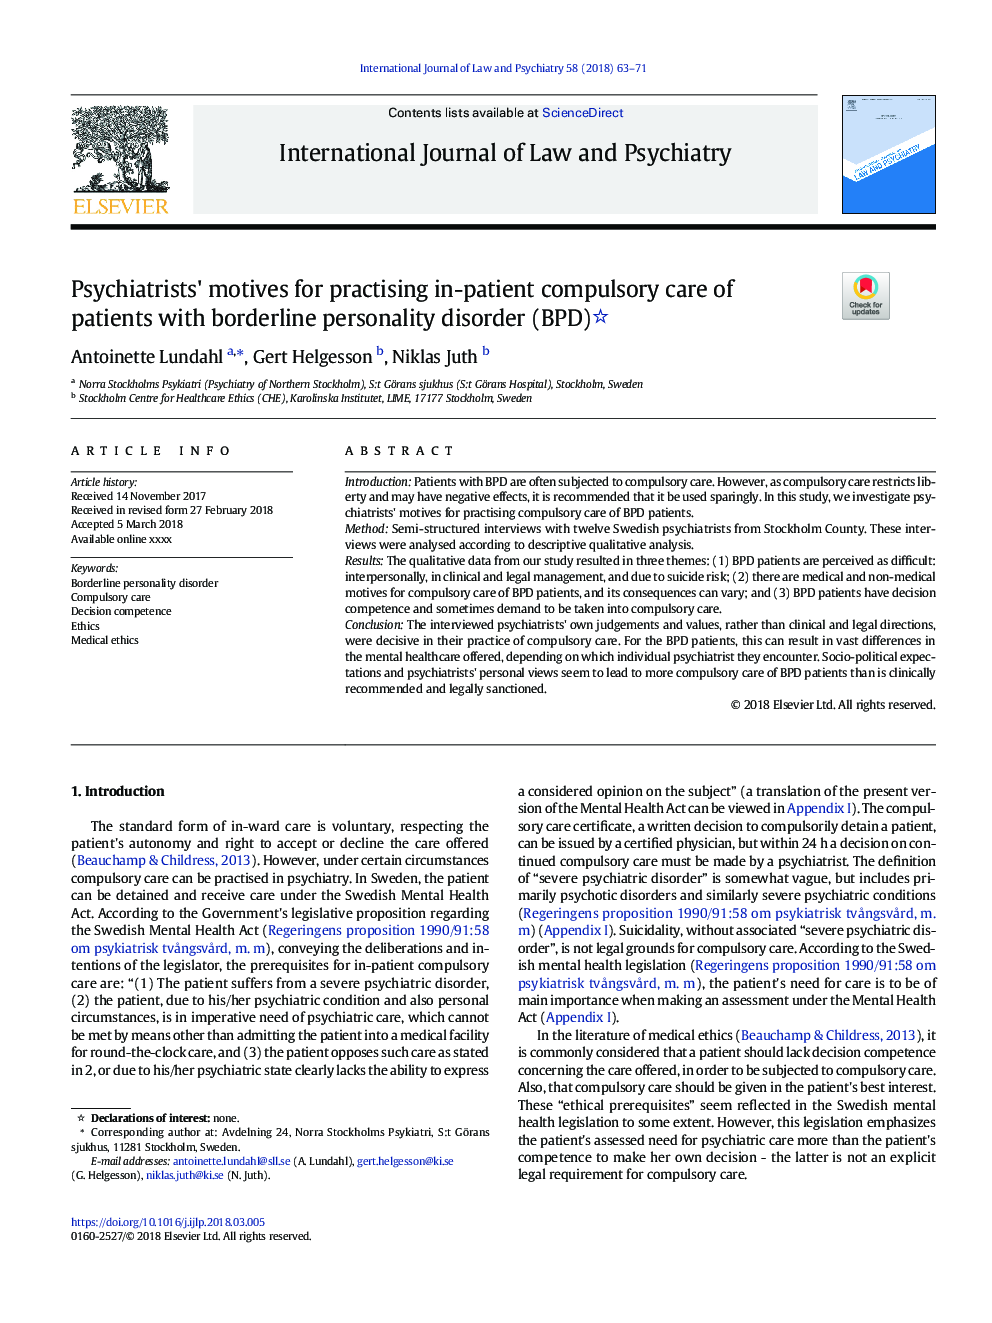 Psychiatrists' motives for practising in-patient compulsory care of patients with borderline personality disorder (BPD)